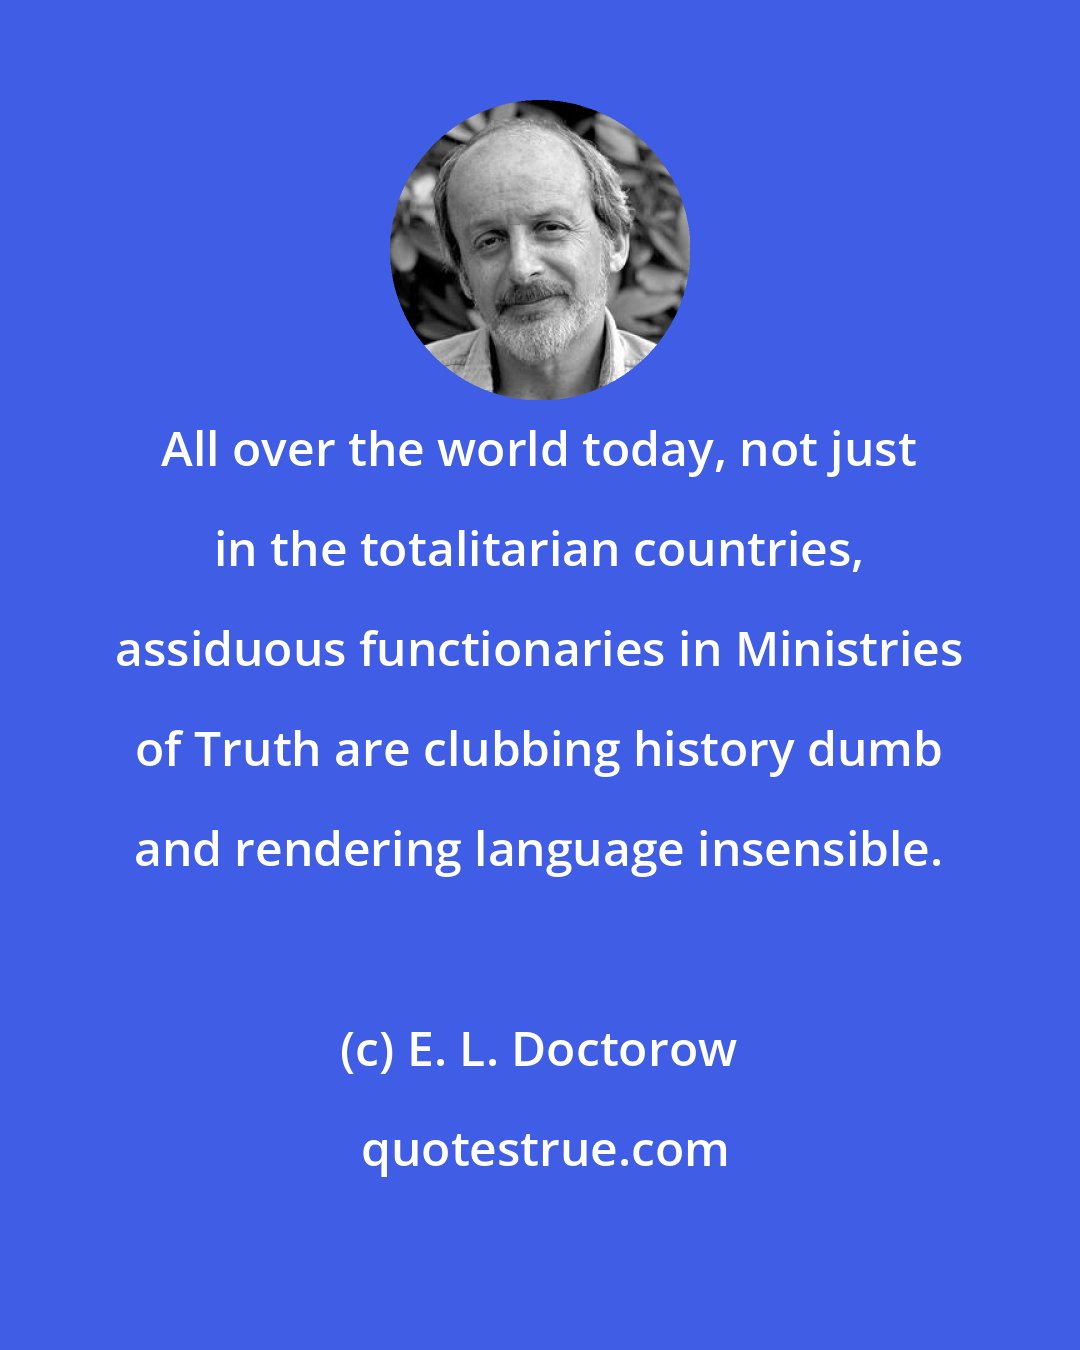 E. L. Doctorow: All over the world today, not just in the totalitarian countries, assiduous functionaries in Ministries of Truth are clubbing history dumb and rendering language insensible.